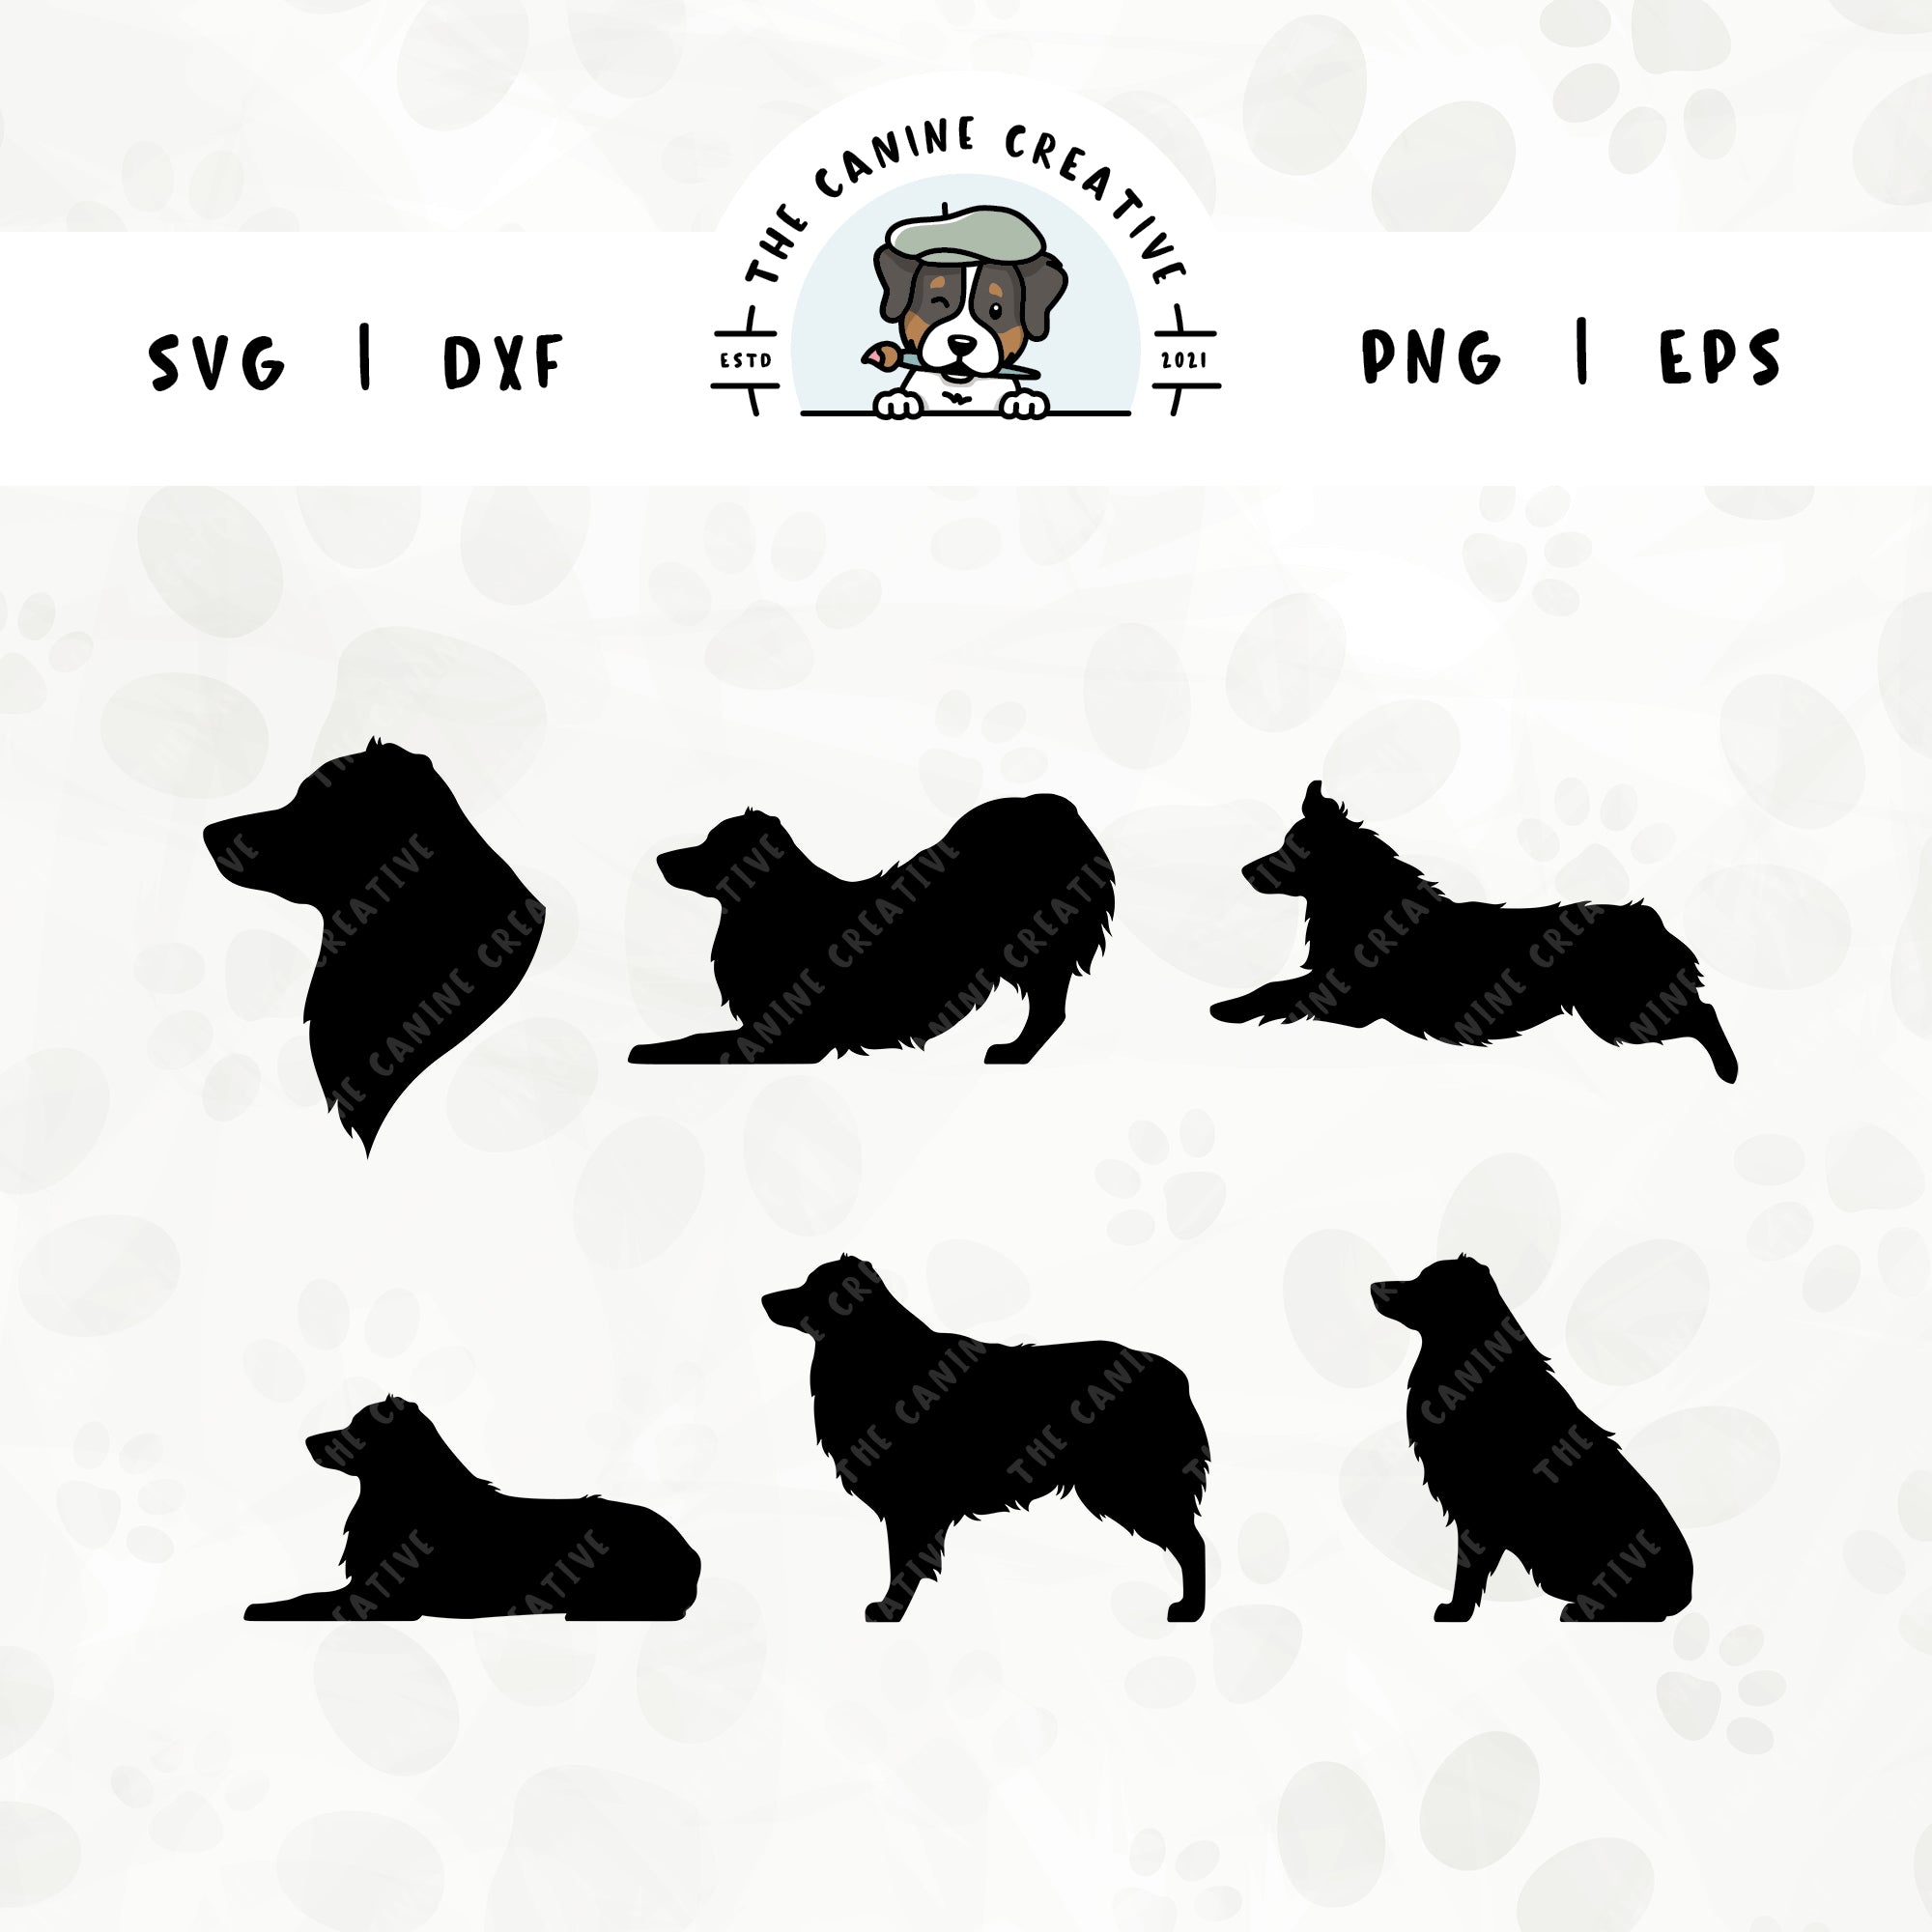 This 6-pack, docked tail Australian Shepherd silhouette bundle (set 1) features a dog's head in profile, along with various poses including running, laying down, playing, standing, and sitting. File formats include: SVG, DXF, PNG, and EPS.